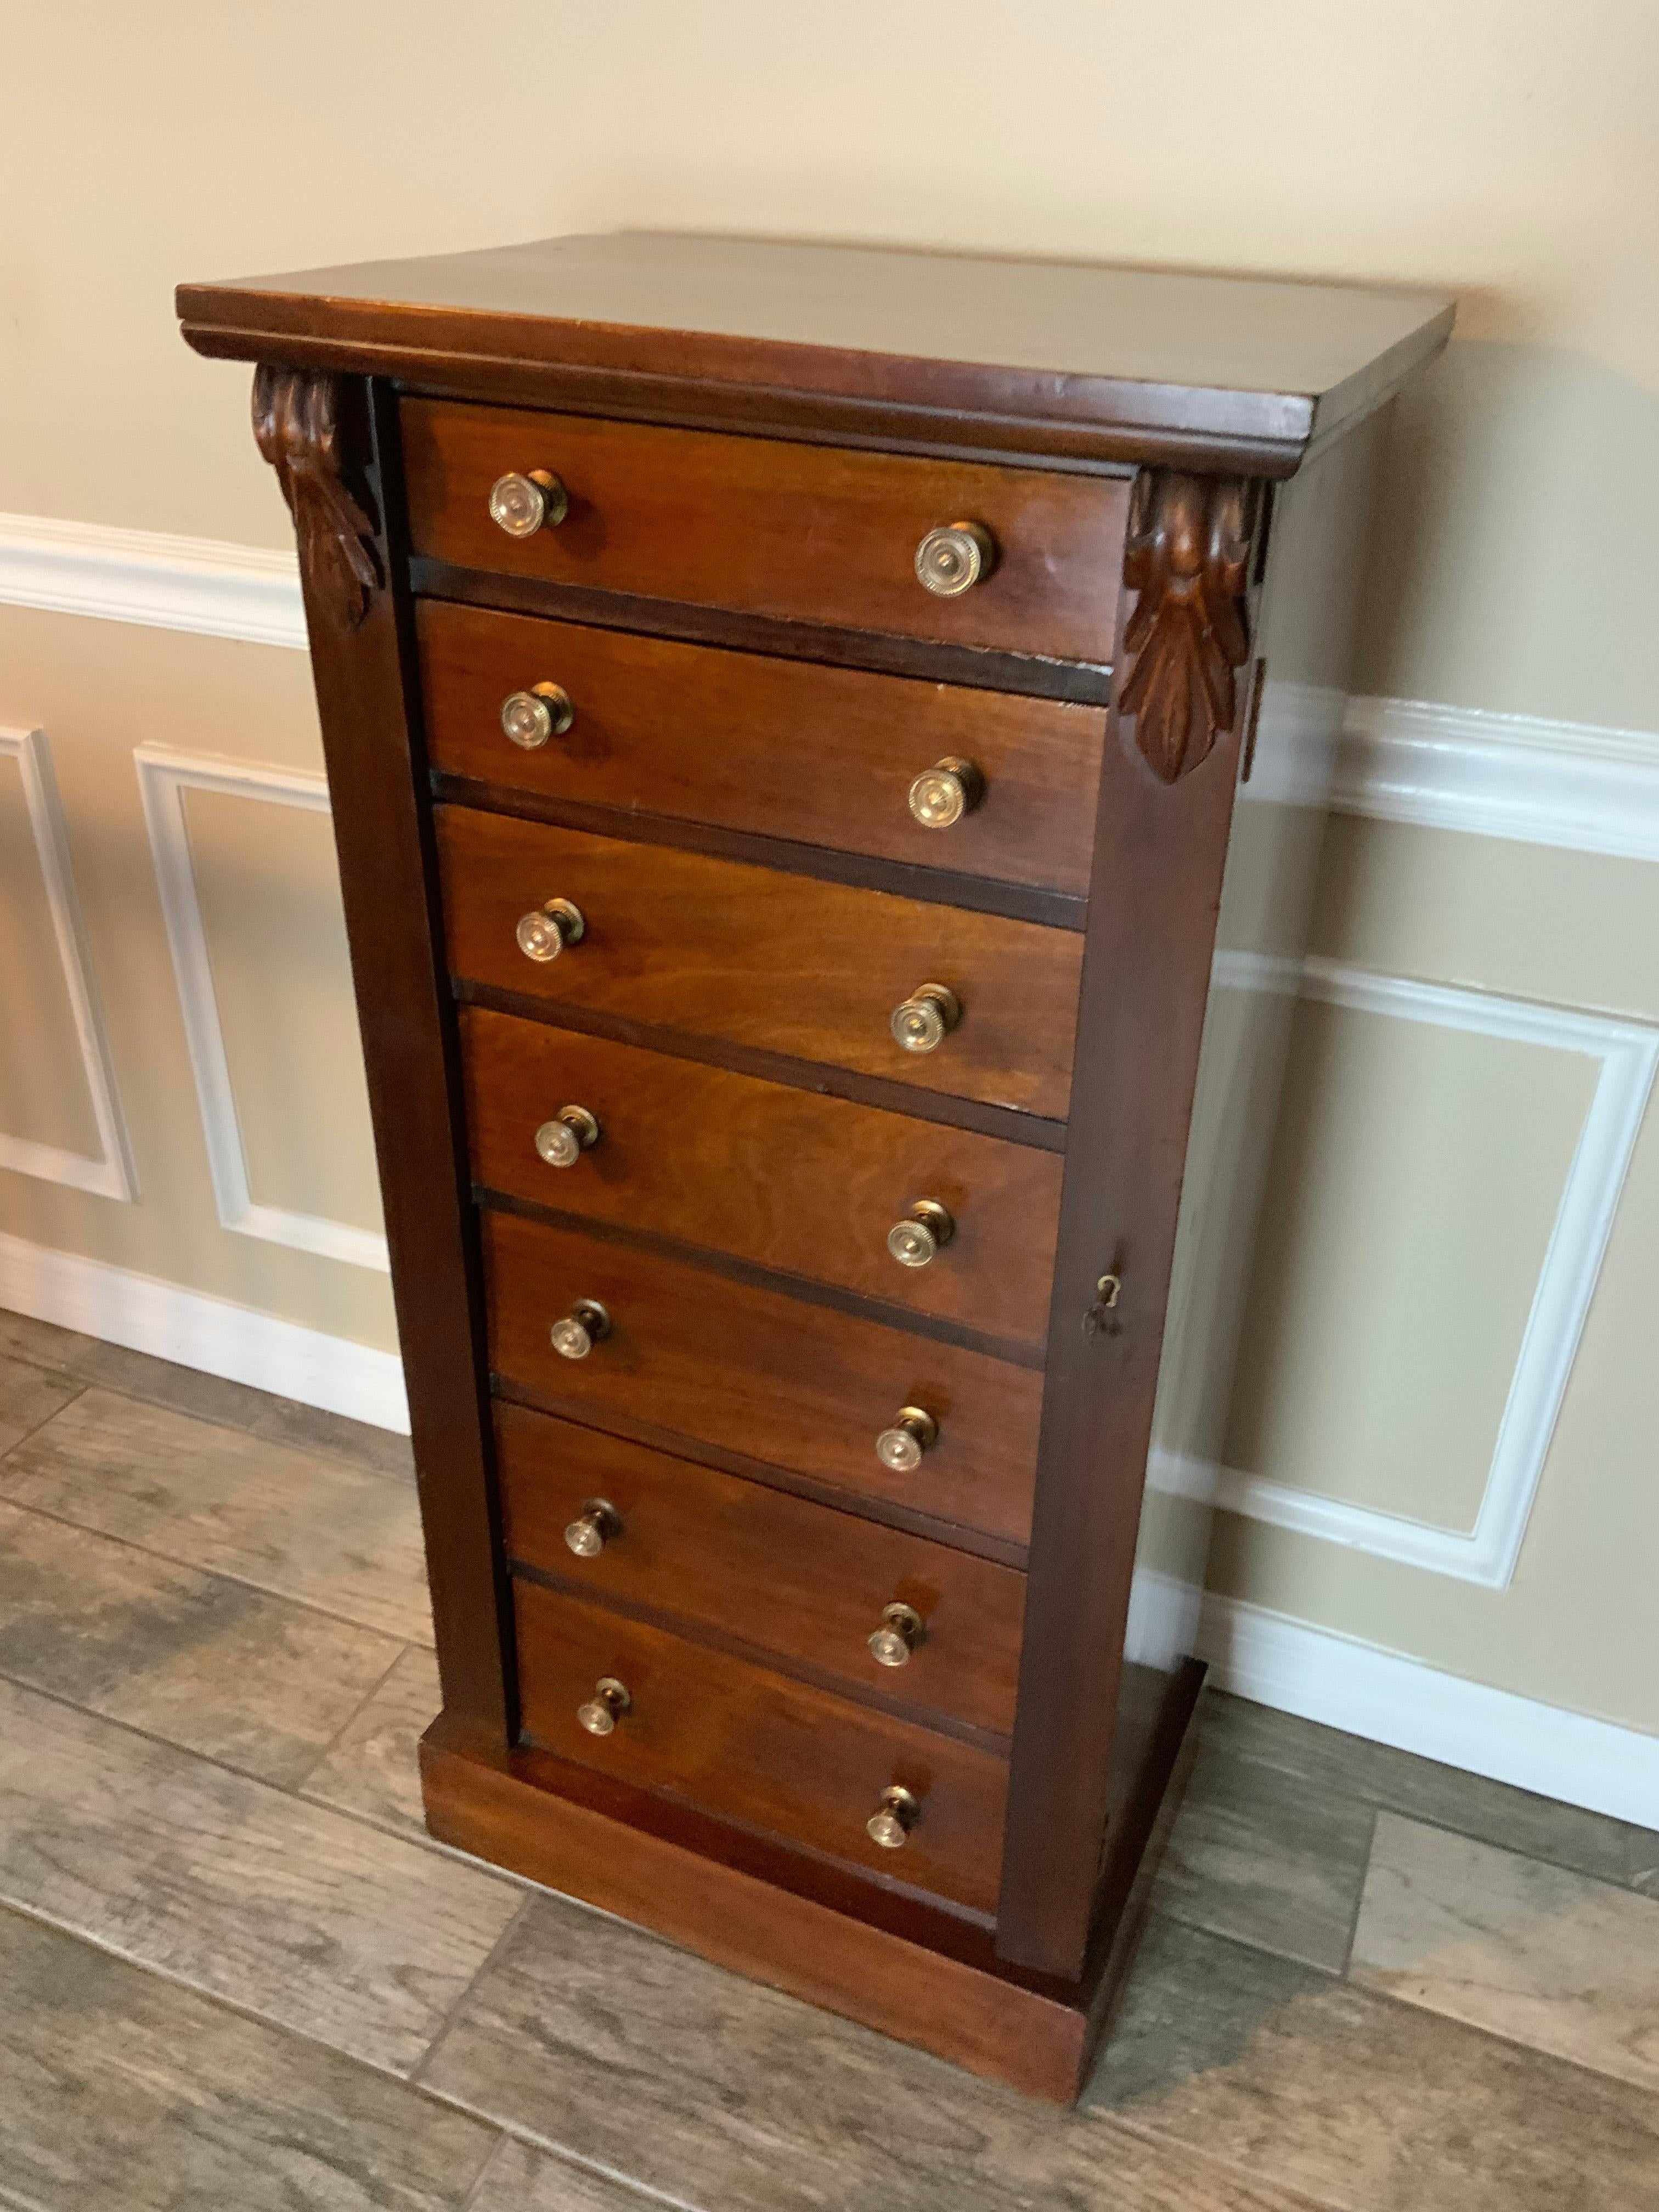 A very nice 19th century seven drawer Mahogany Wellington lock side chest. Dating from about 1870 this chest has a nice mellow aged color to the old Mahogany surface and a great patina. Solid Brass drawer pulls are a later replacement at some point